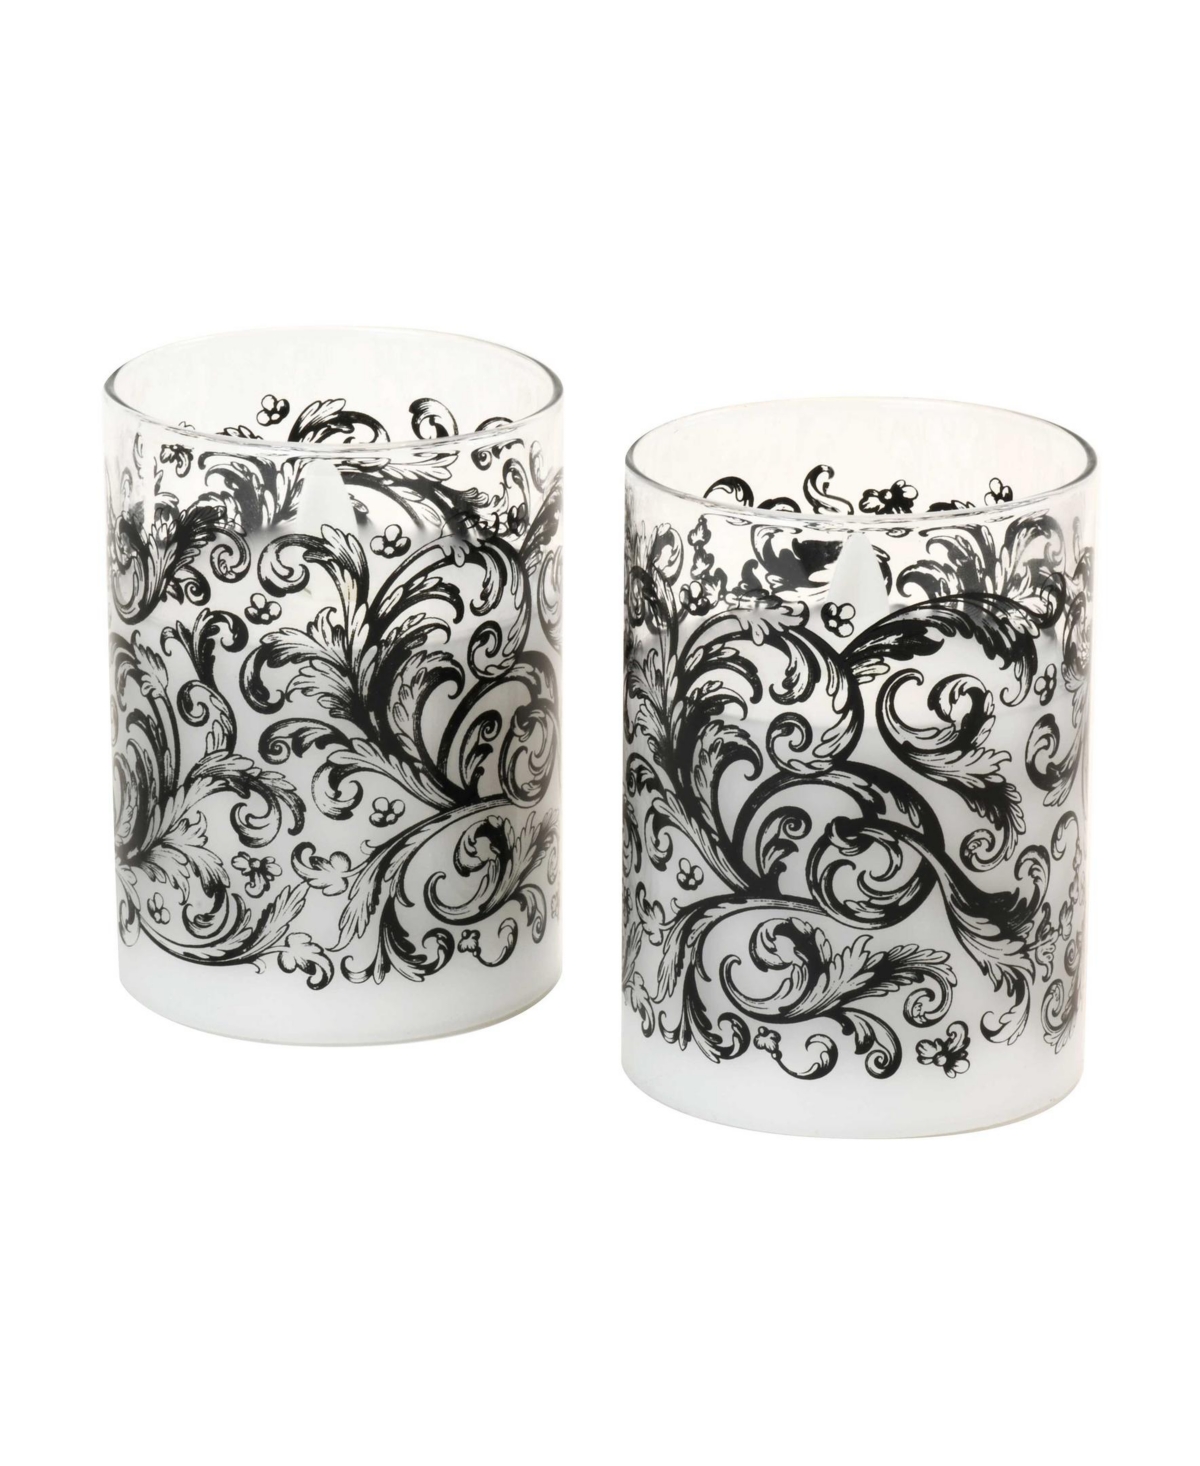 Battery Operated Baroque Swirl Led Glass Candles with Moving Flame, Set of 2 - Black